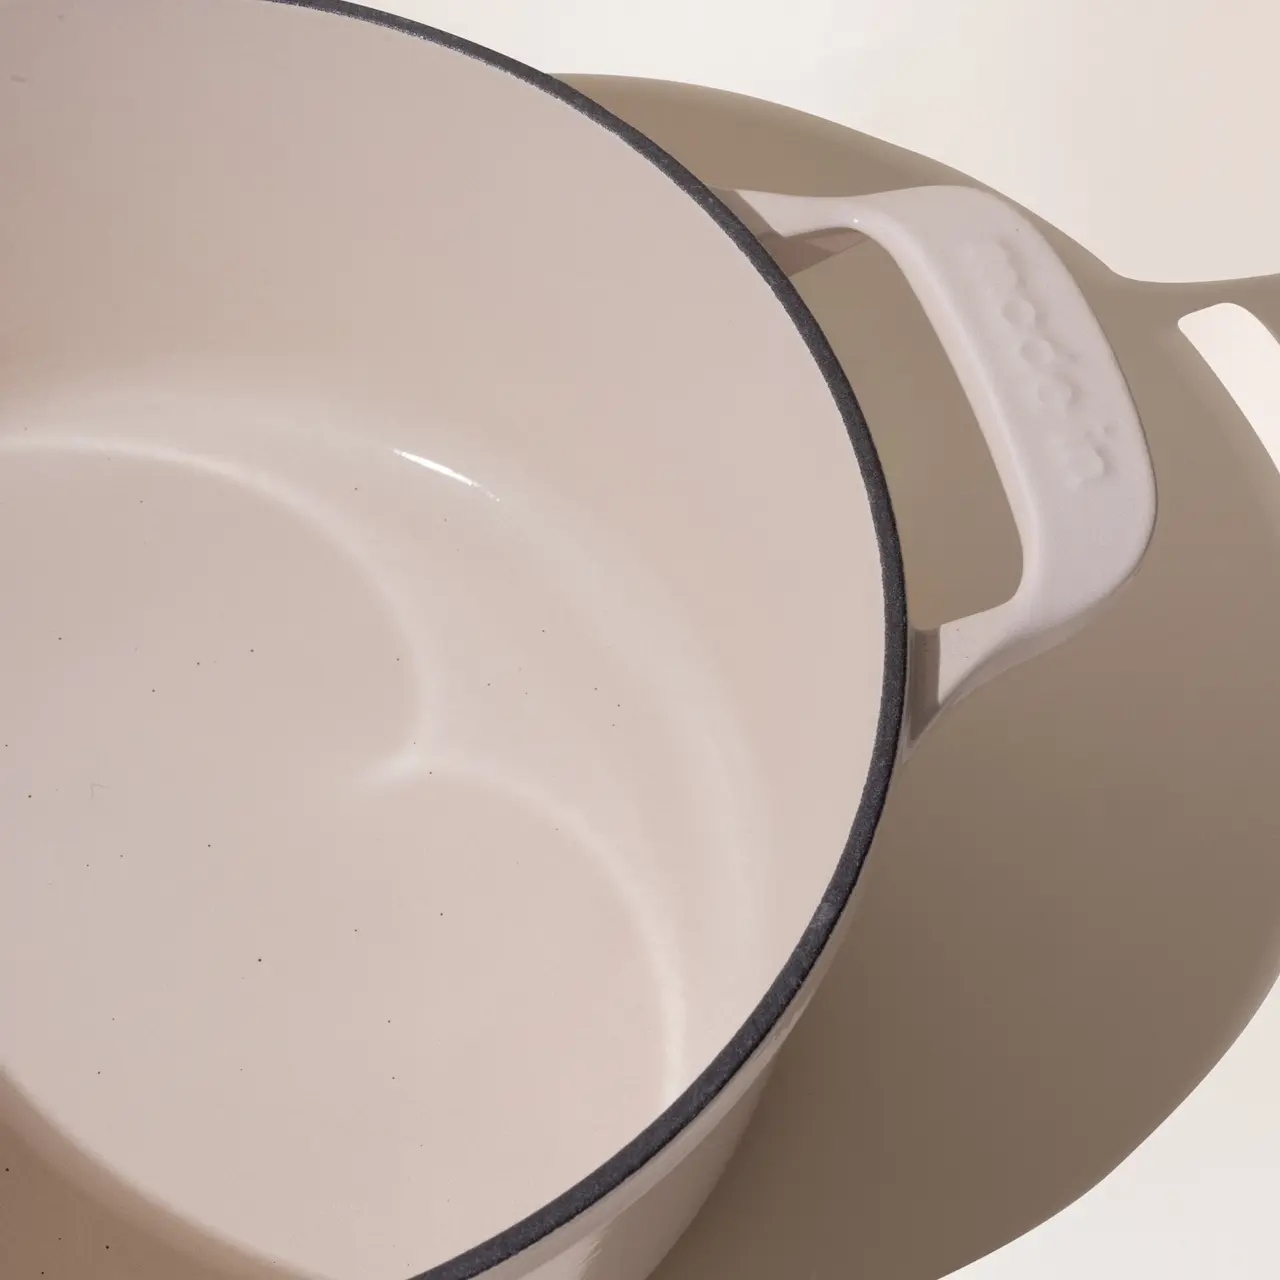 A close-up of a beige ceramic pan with a white interior and a black rim, highlighting its curved edge and handle.